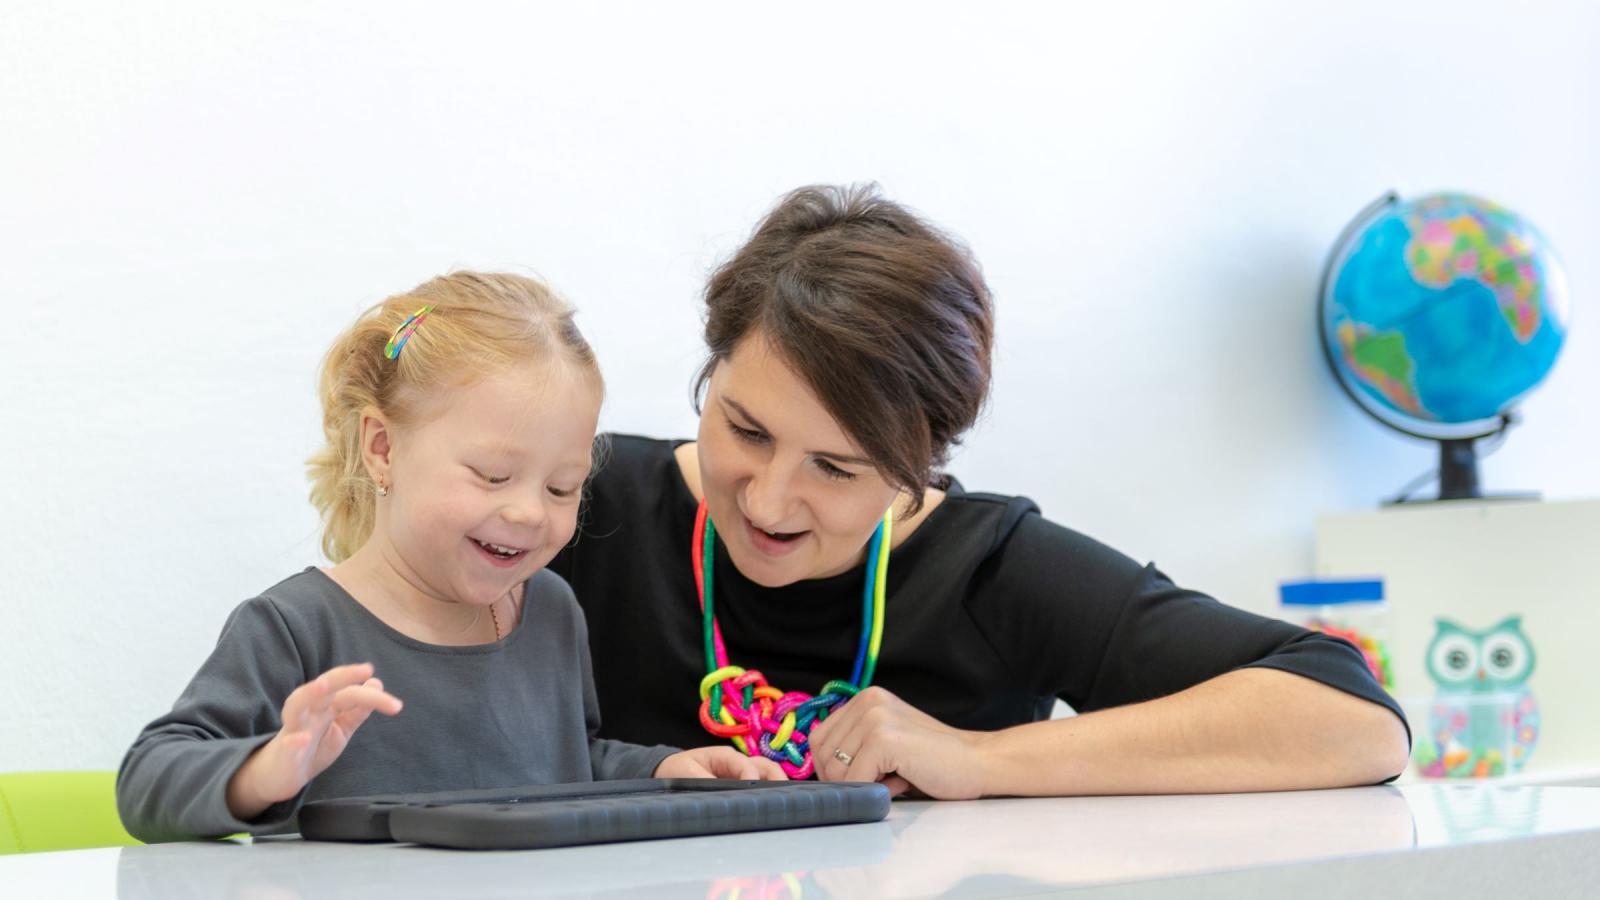 Child and therapist engaging in an activity on a screen